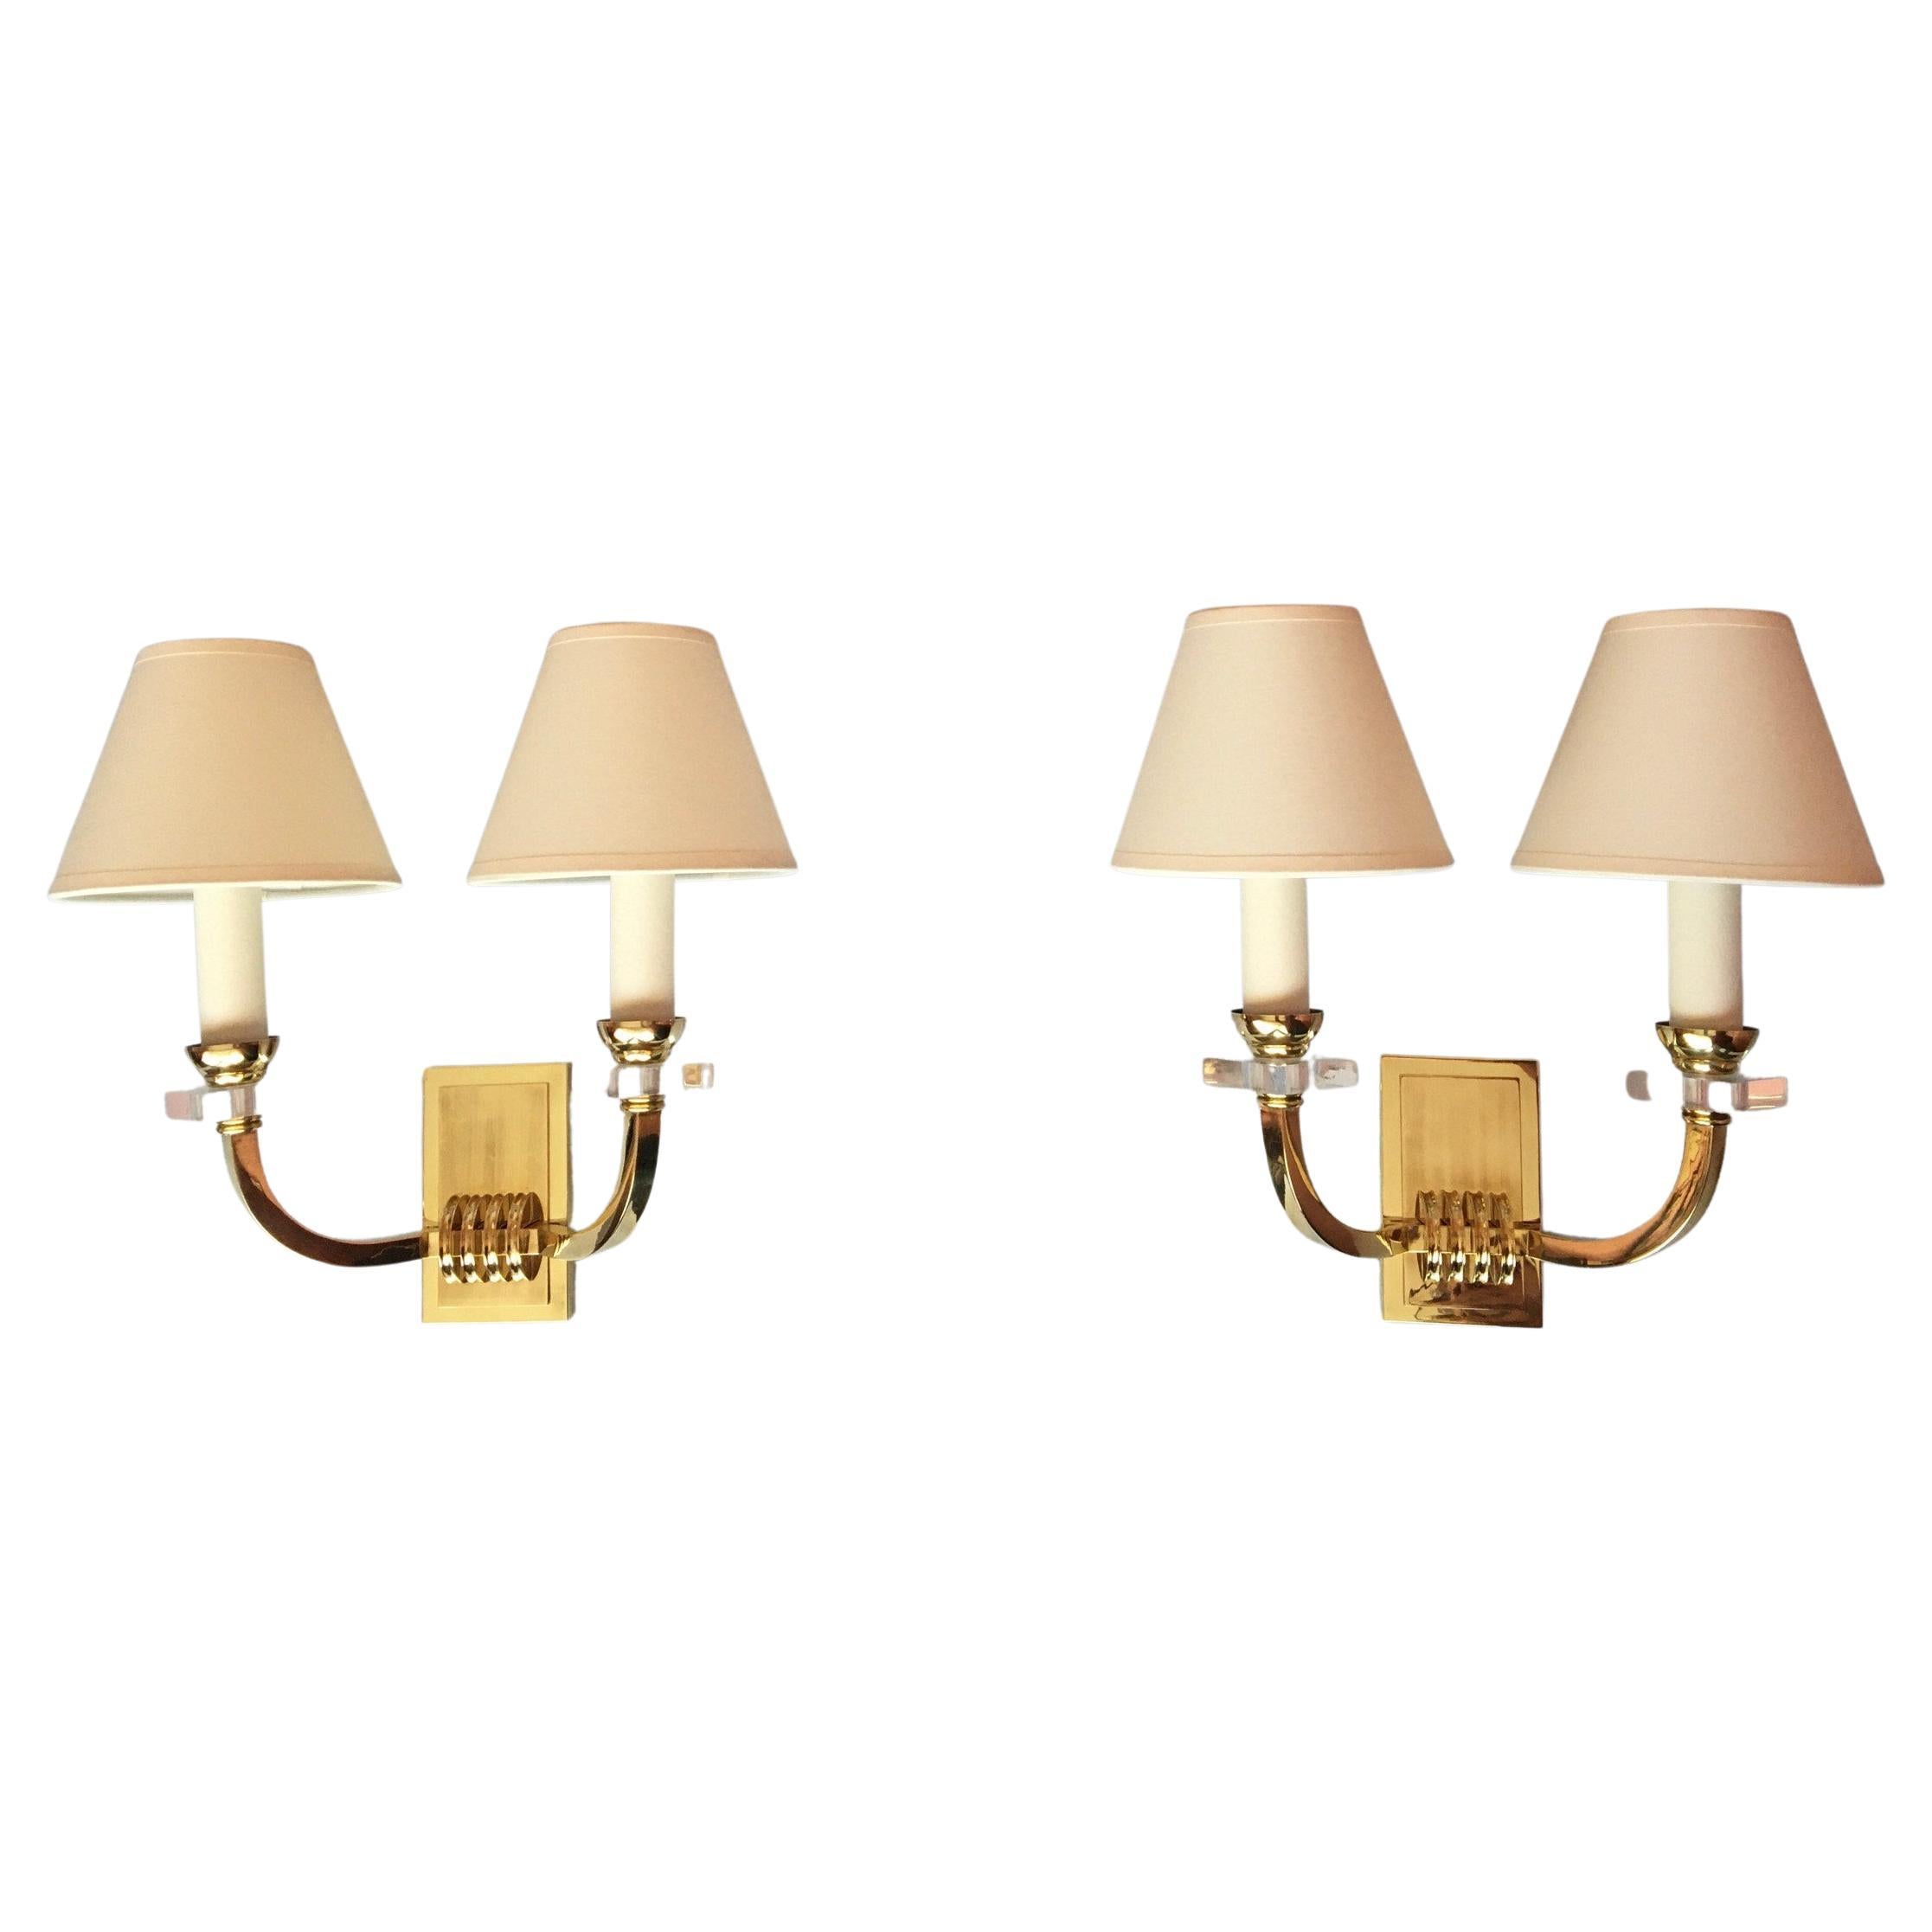 Jacques Adnet Neoclassical Pair of Bronze Sconces, France, 1950 For Sale